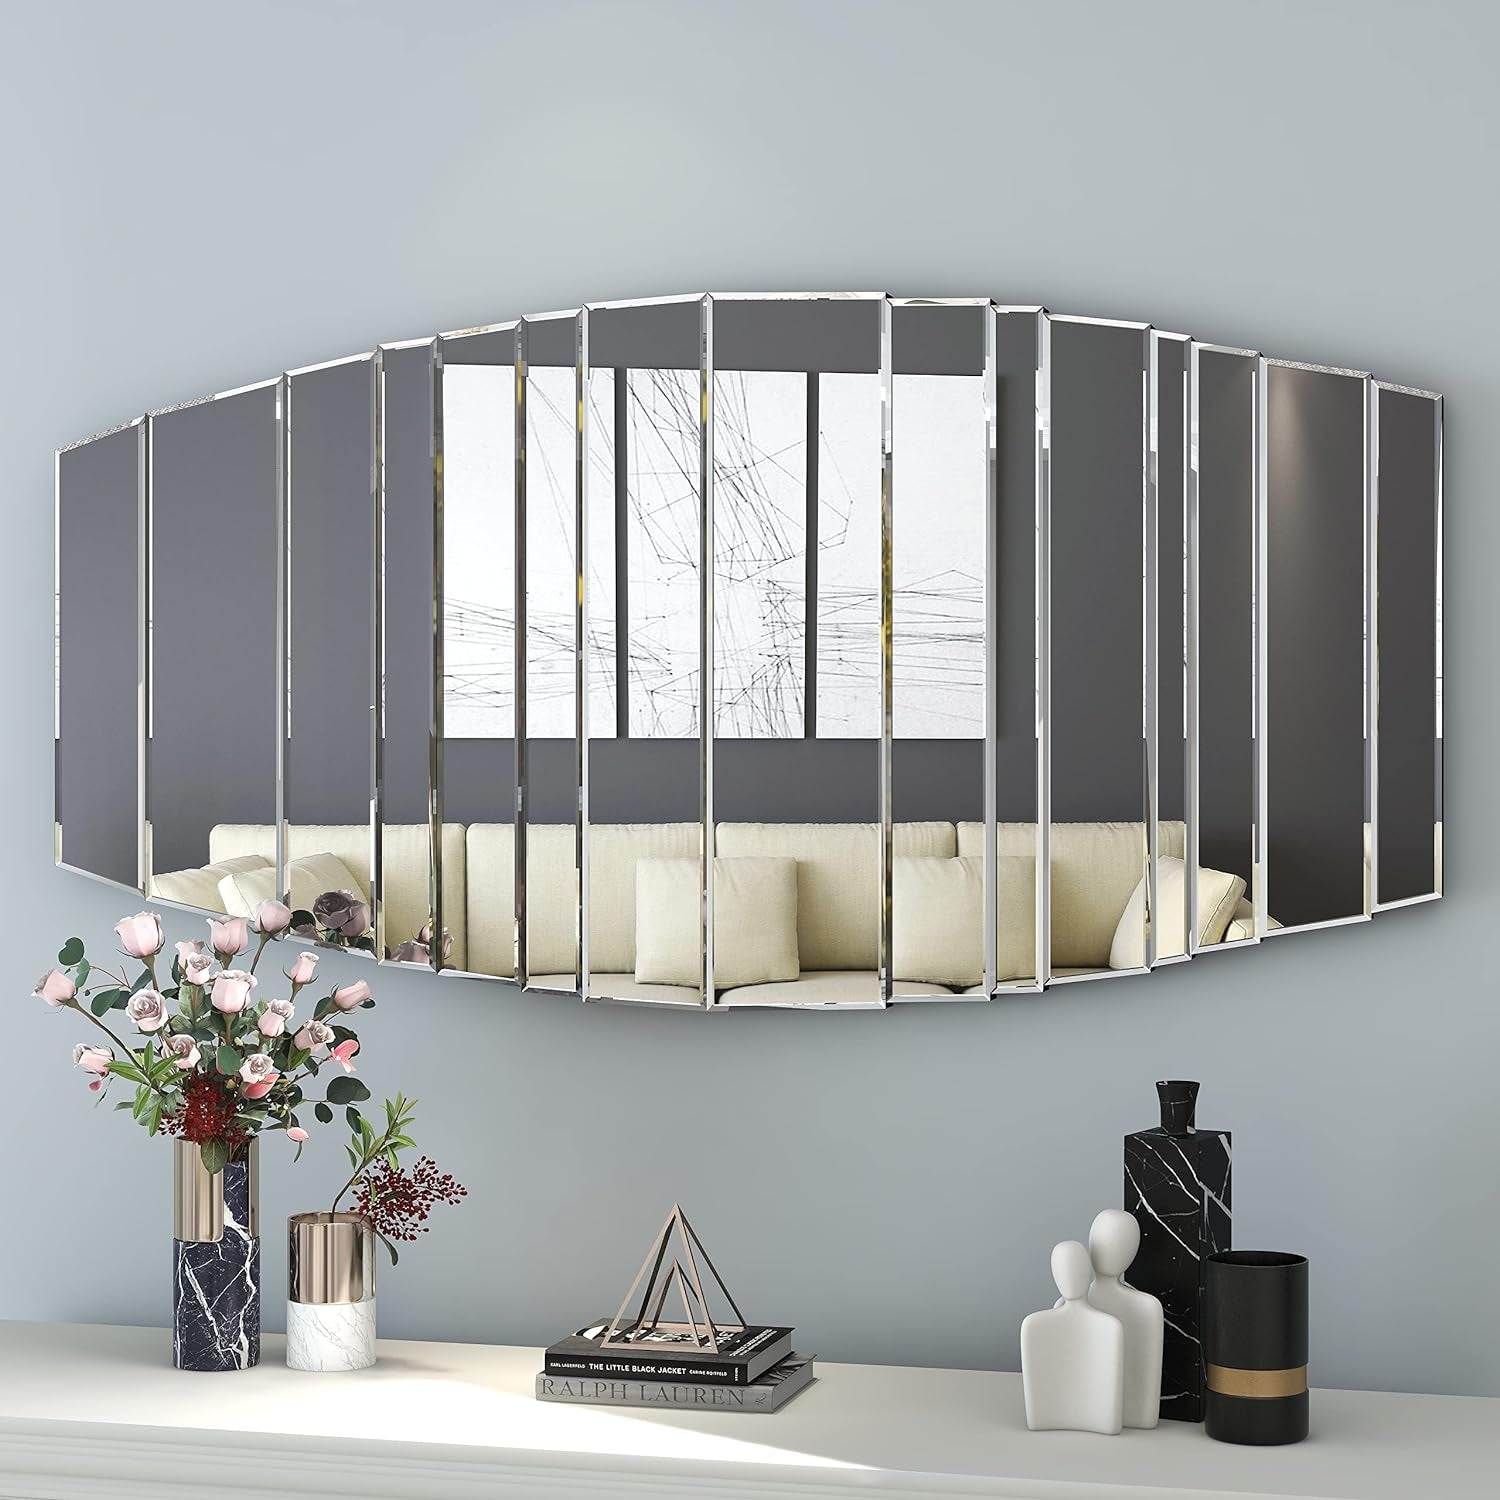 Frameless Oval Wall Mirror for Modern Decor - Decorative Stitching Mirrors for Living Room, Bathroom, Bedroom, and Entryway - Abstract Shape Square Mirror in Silver - Size 43X 21.5